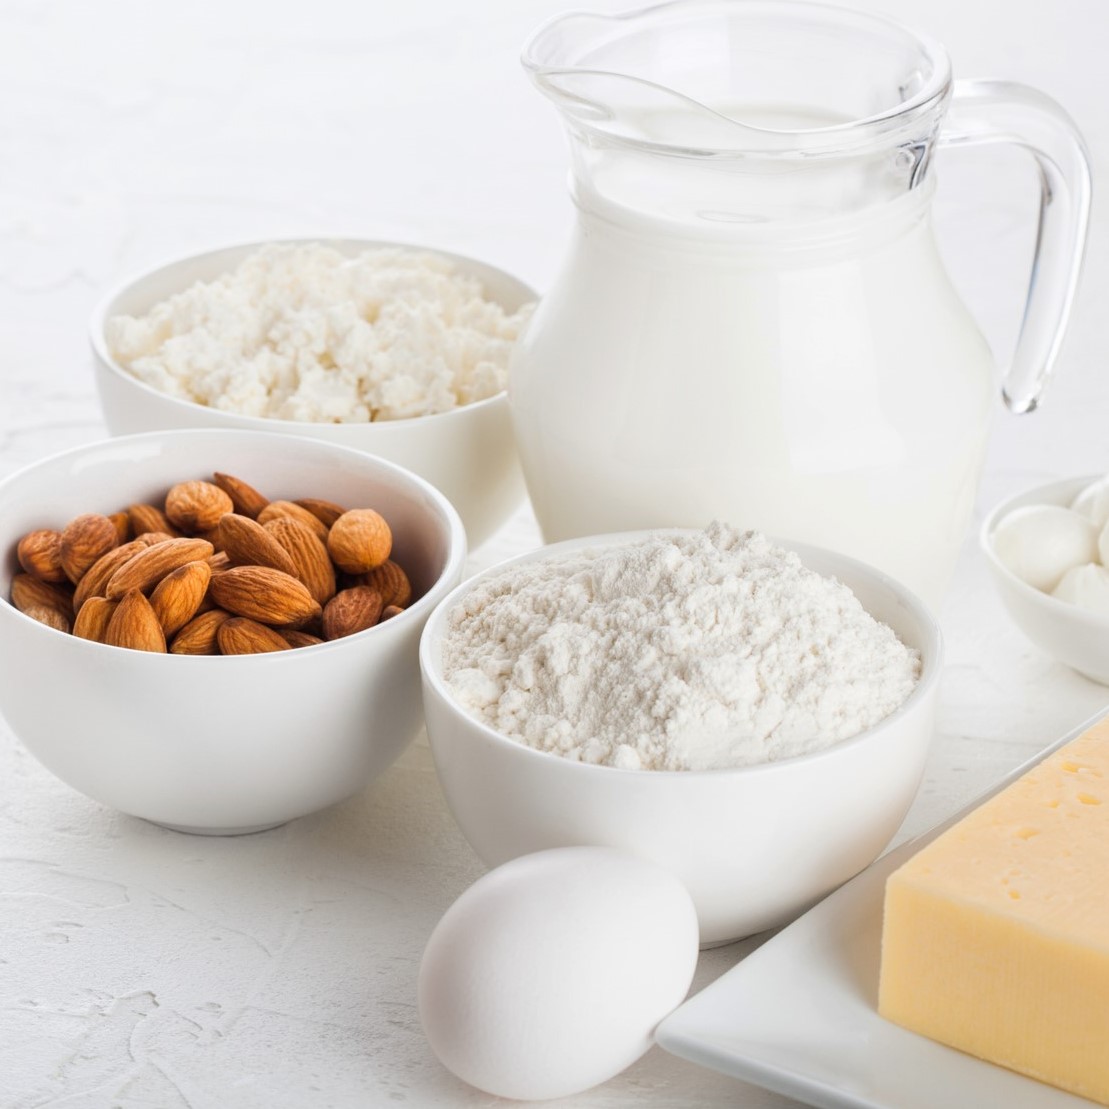 Glass jar of milk, bowl of cottage cheese, baking flour, almond, and eggs on table.